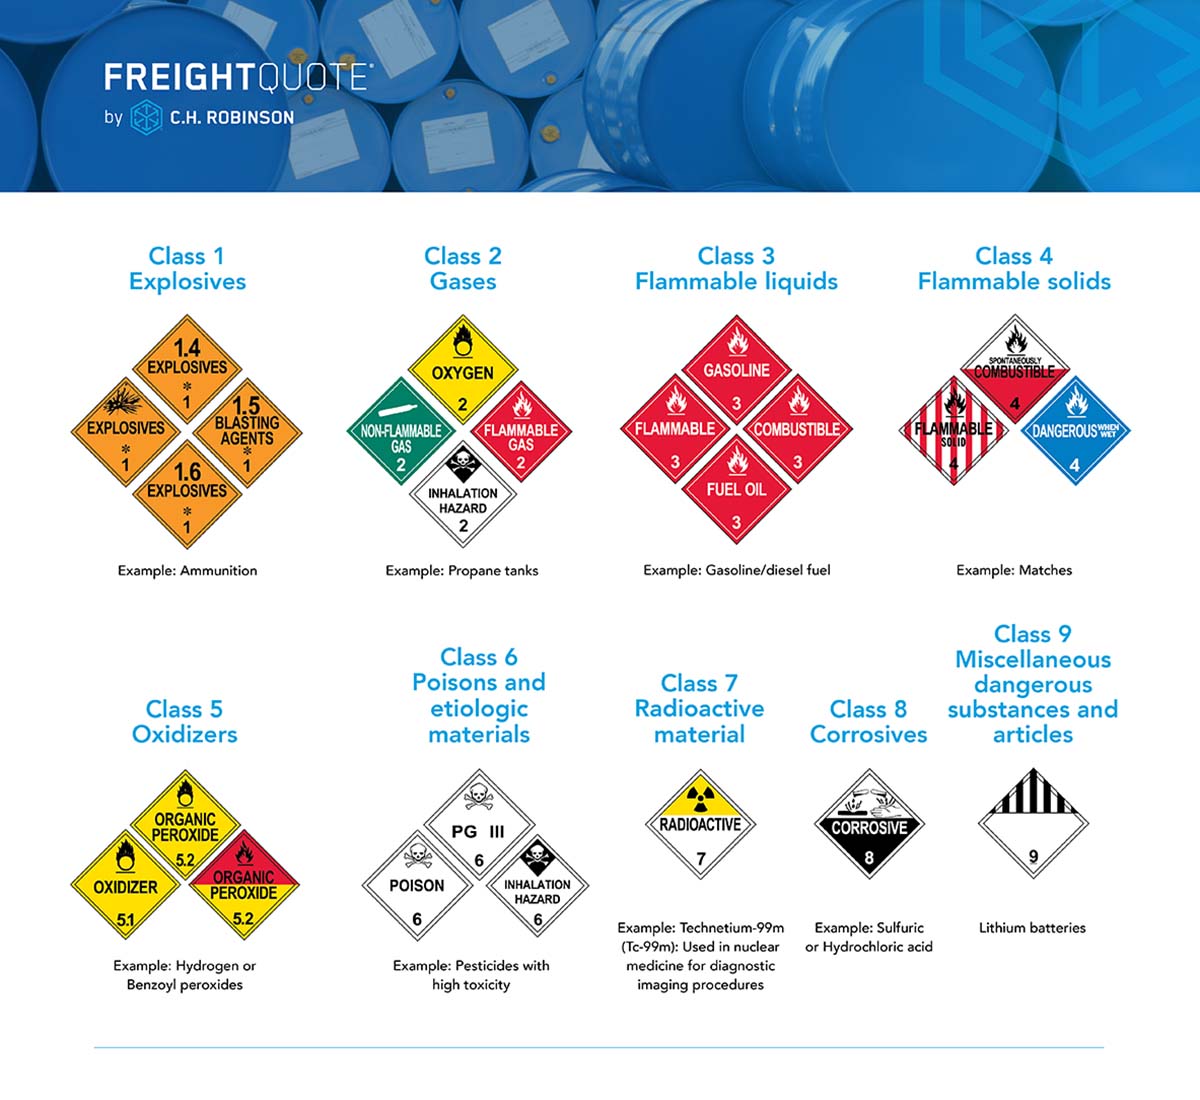 Hazardous material freight classifications | Freightquote